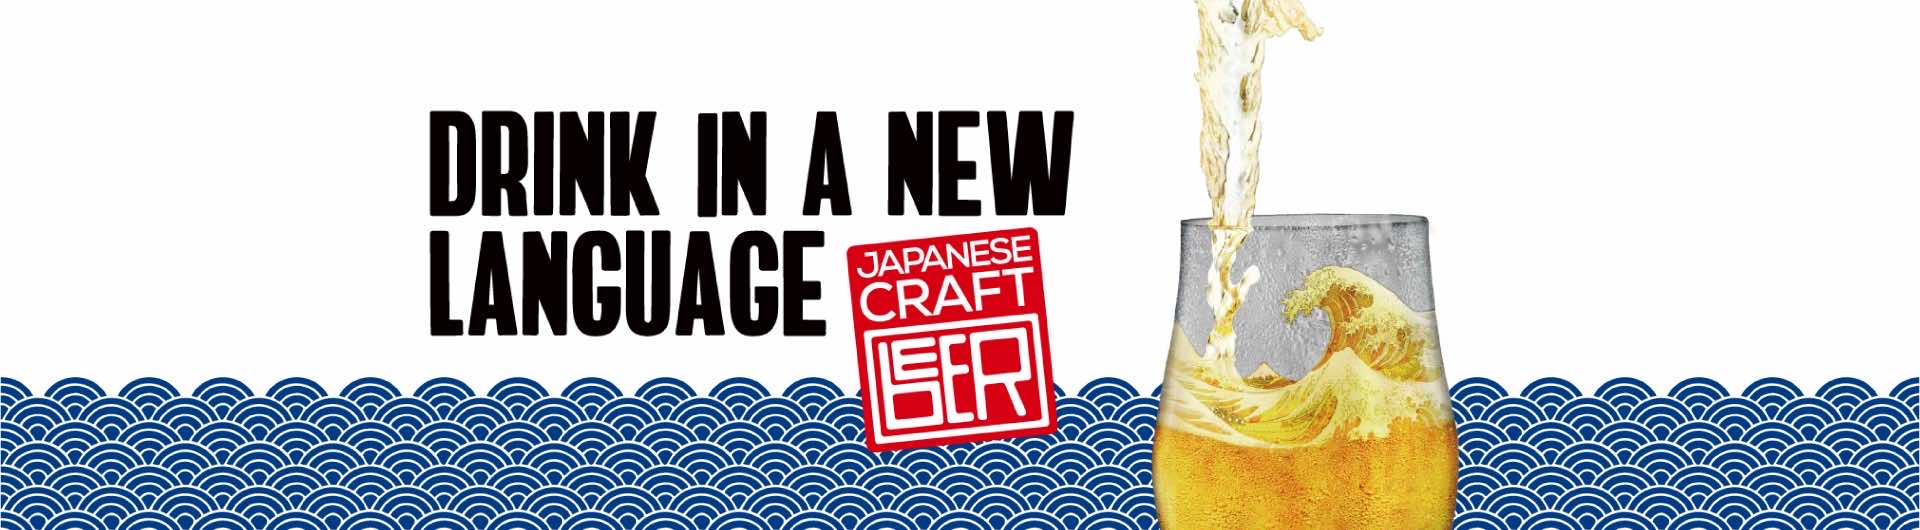 Drink in a new language: japanese craft beer